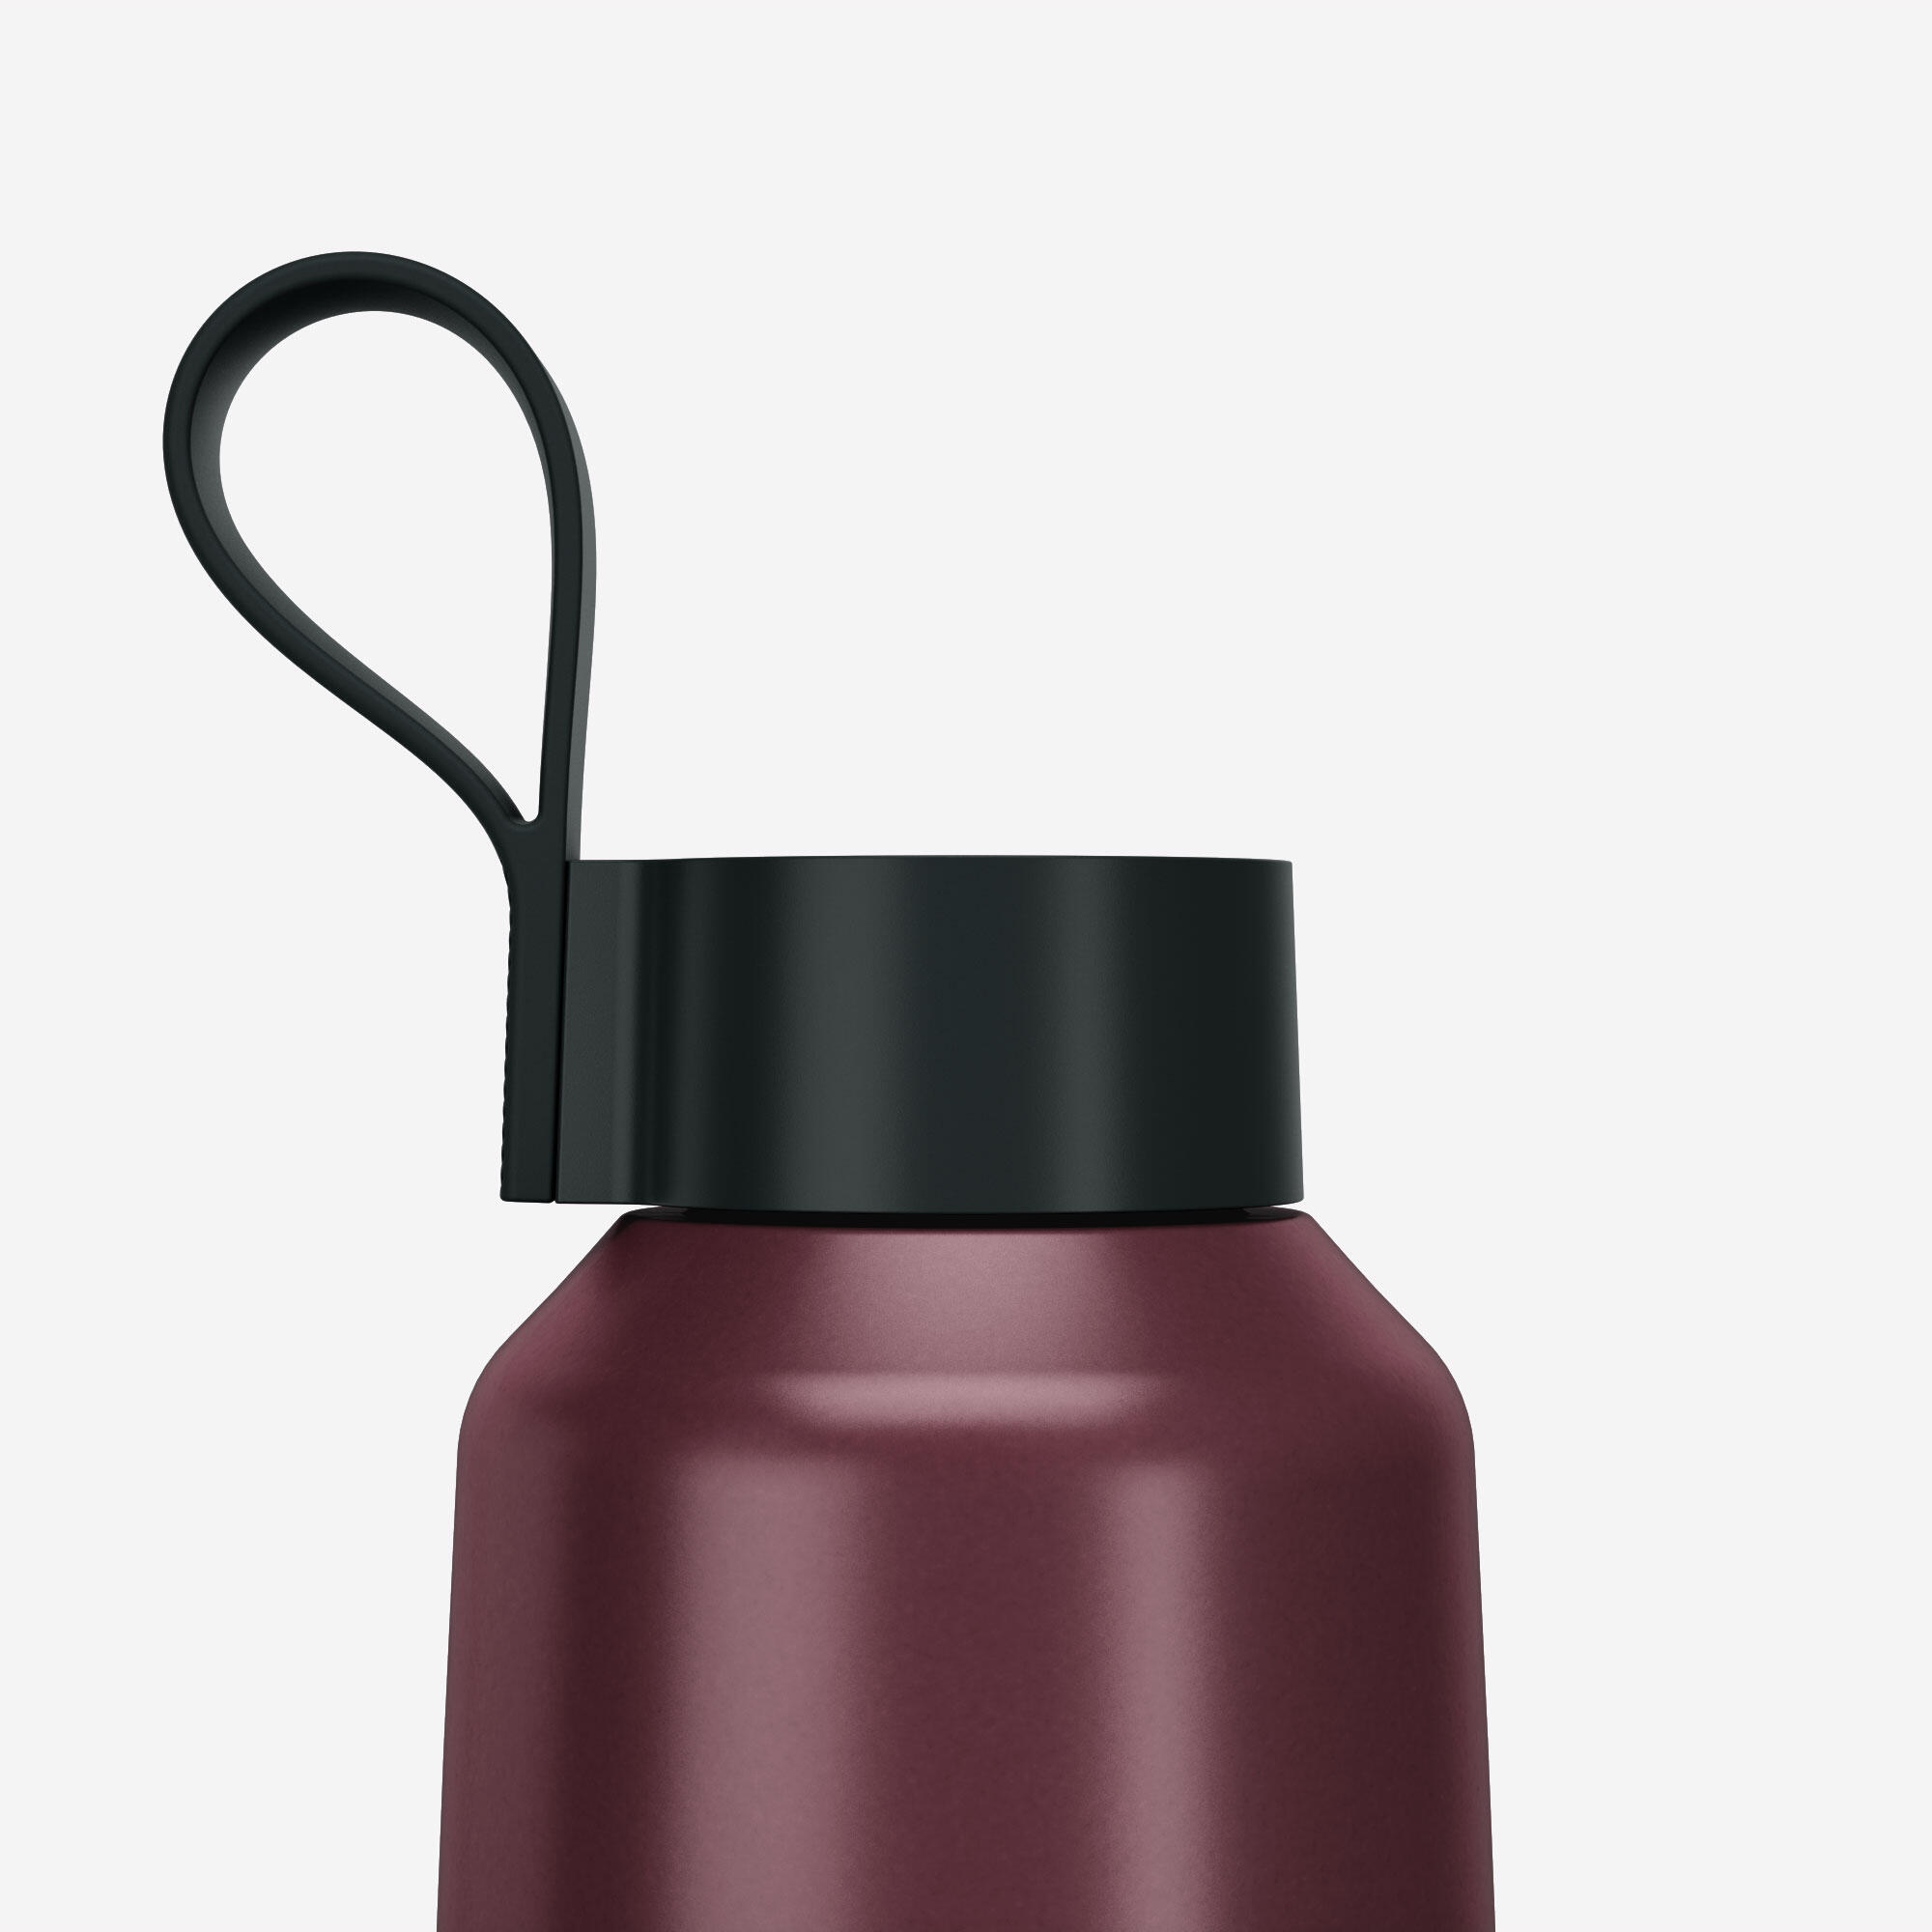 1 L stainless steel water bottle with screw cap for hiking 9/10